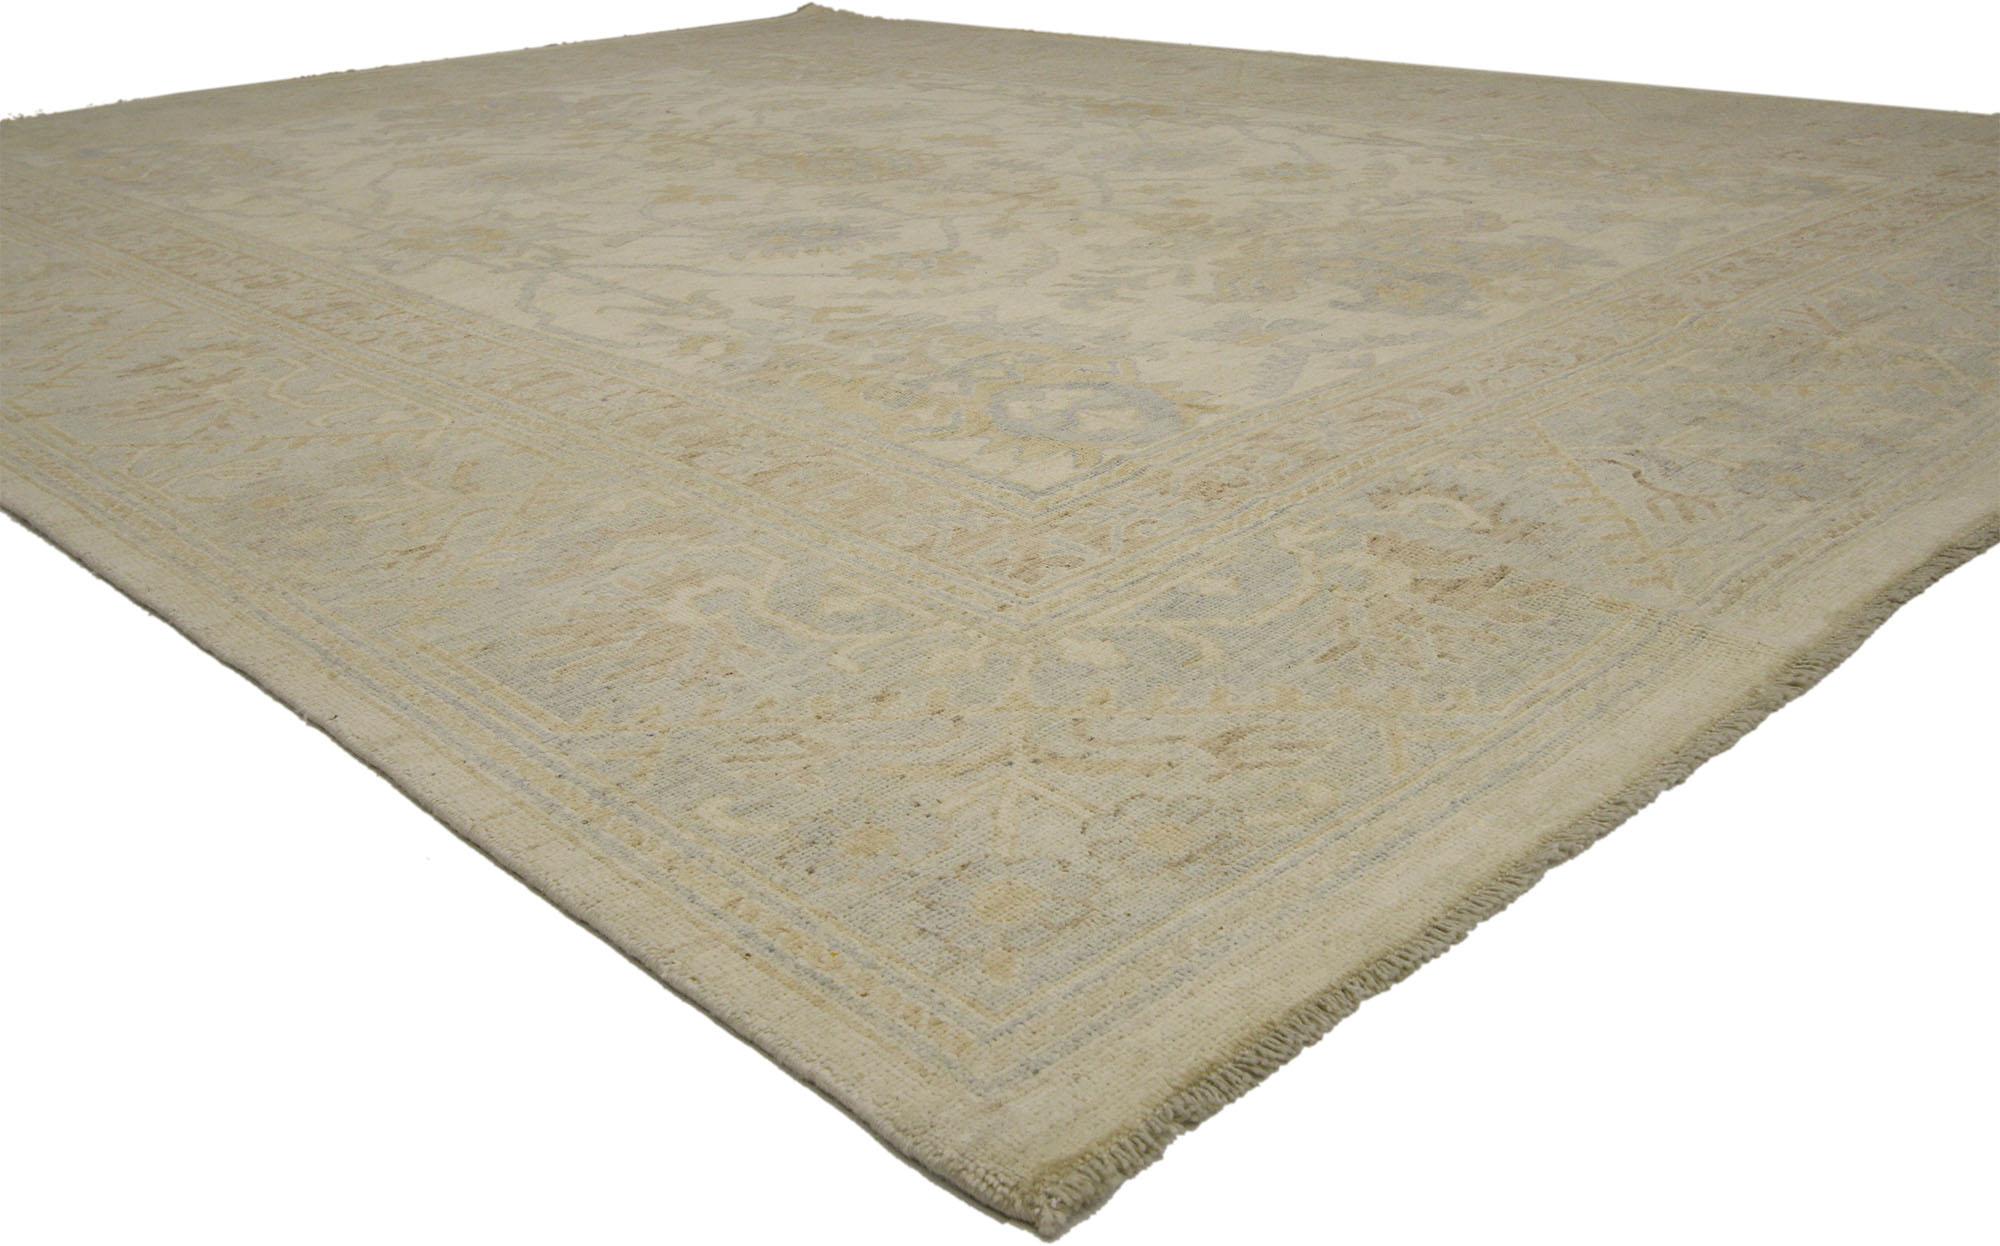 80214, new contemporary Oushak style area rug with modern coastal vibes. Blending elements from the modern world with neutral hues, this hand knotted wool contemporary Oushak rug will boost the coziness factor in nearly any space. It features an